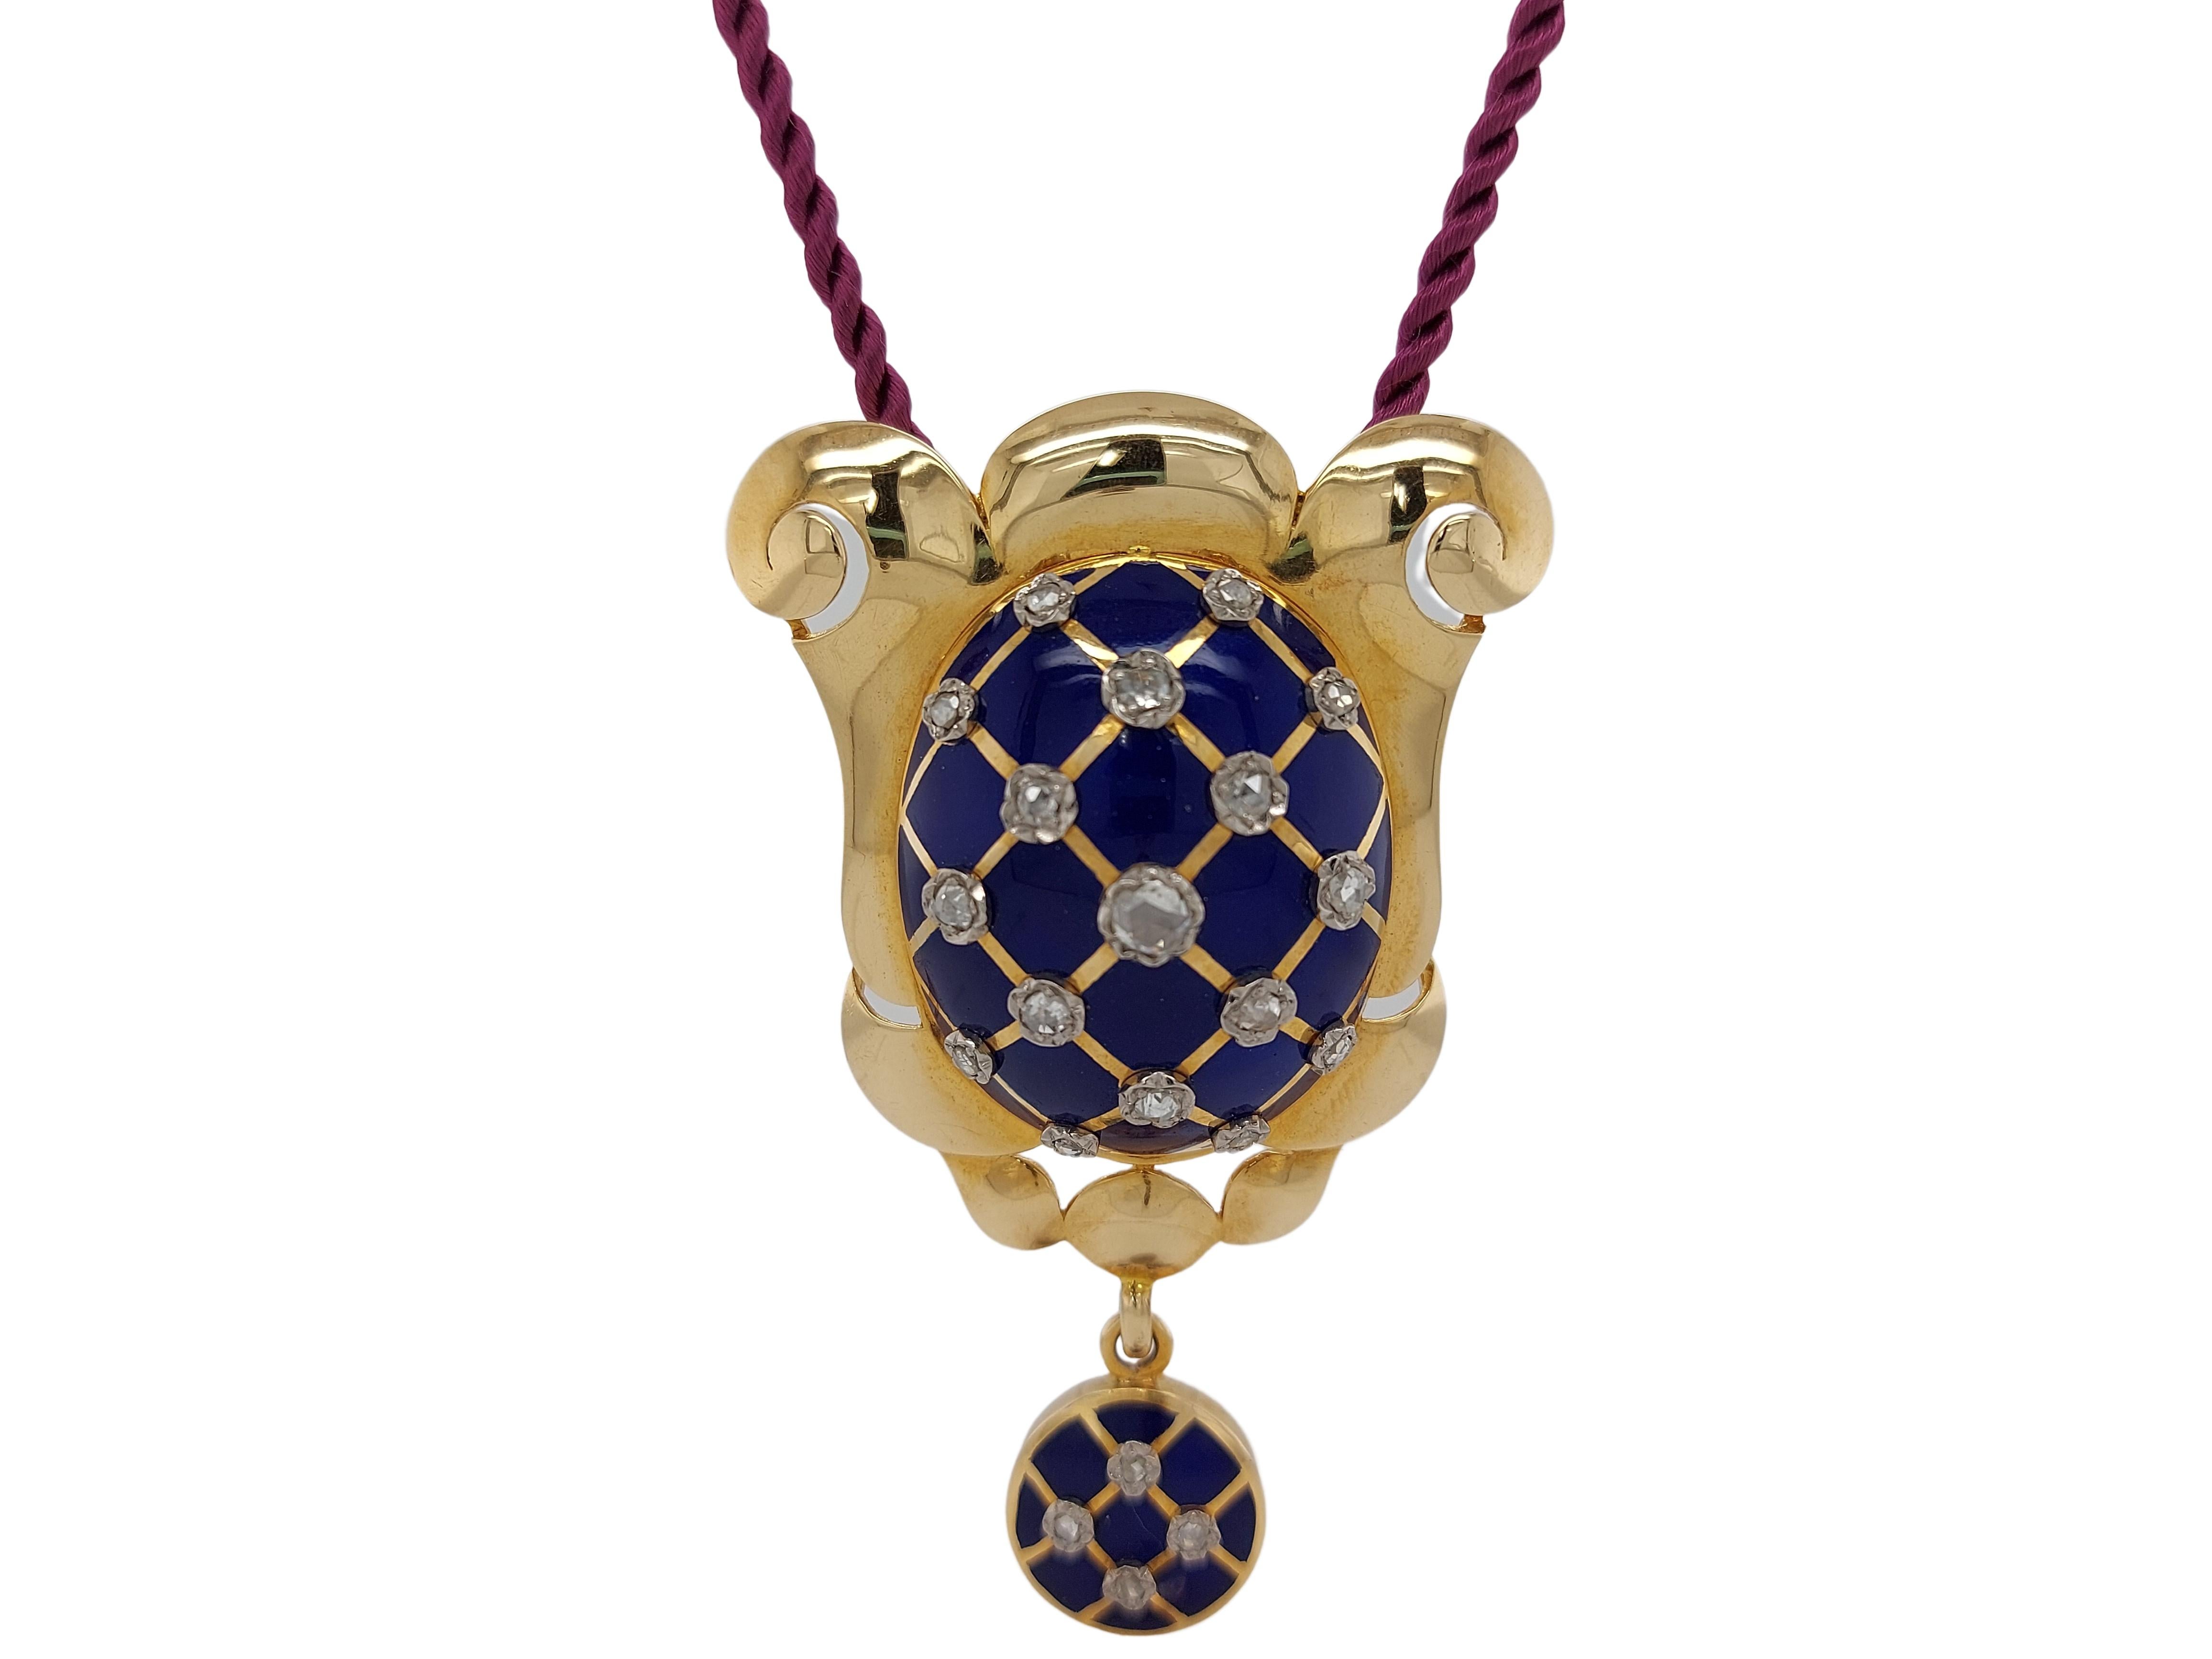 18 Kt Yellow Gold Turtle Pendant With Deep Blue Enamel and Rose Cut Diamonds 

Diamonds: 1 big, 8 middle size, 12 small rose cut diamonds

Material: 18 kt yellow gold

Measurements: 72mm x 43 mm x 13.4 mm

Total weight: 40.0grams / 25.7 dwt / 1.410